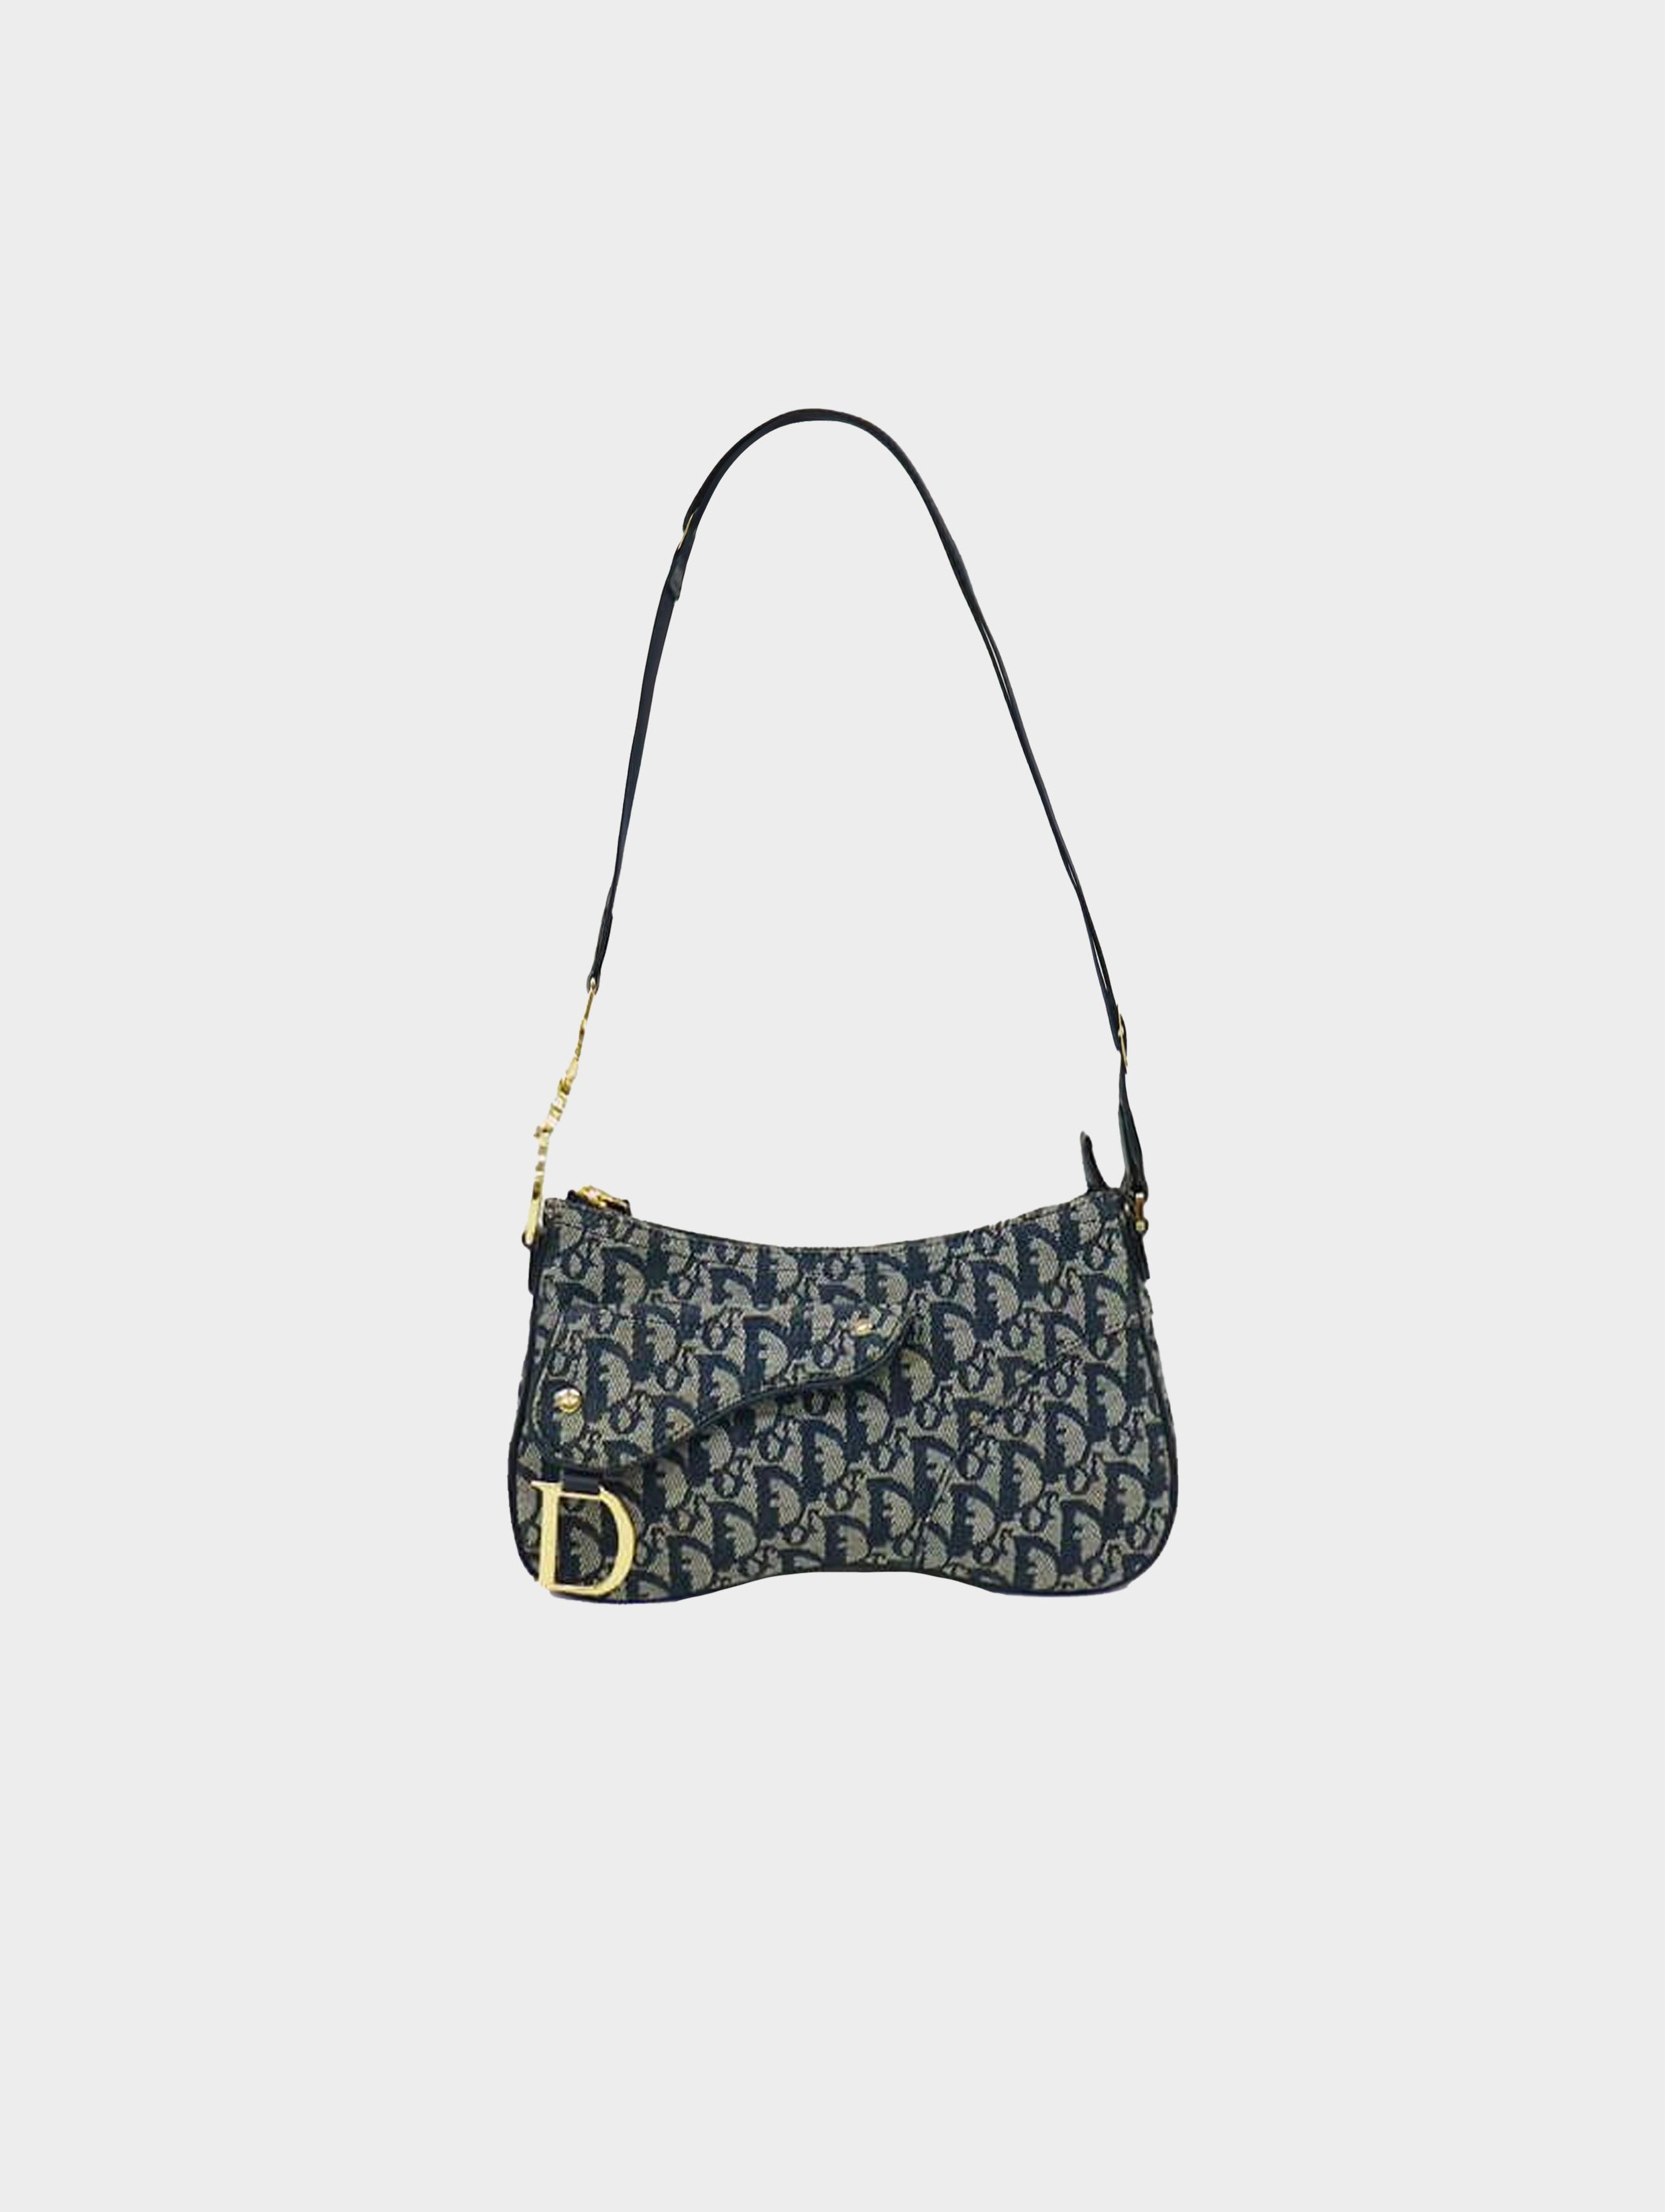 Dior 2010s Navy Trotter Canvas Double Saddle Bag ·